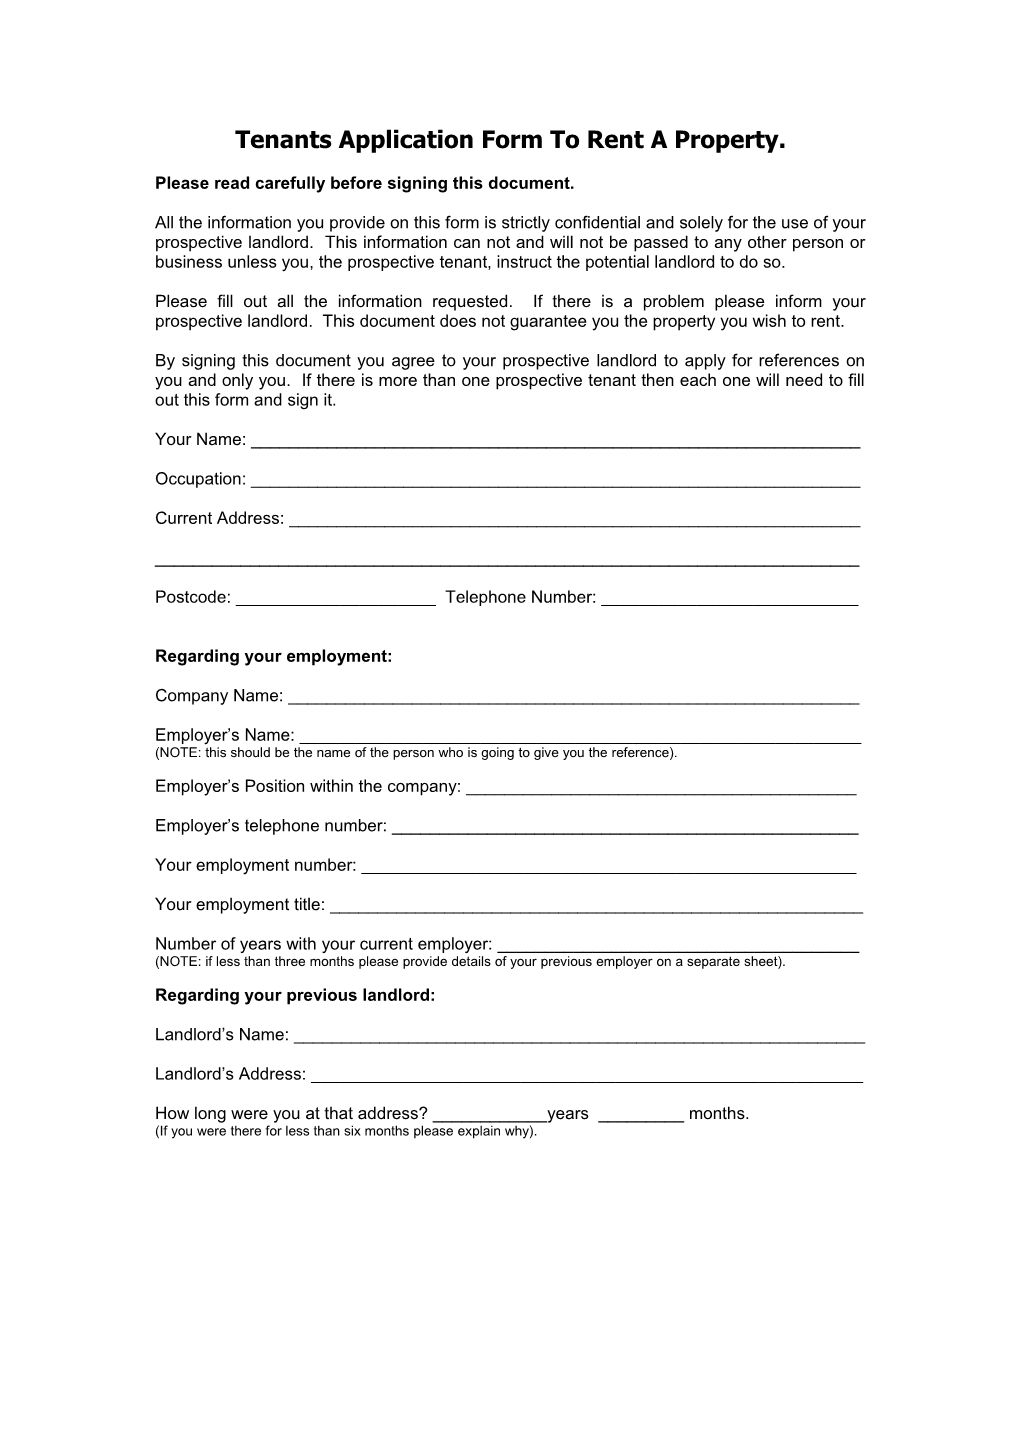 Tenants Application Form to Rent a Property